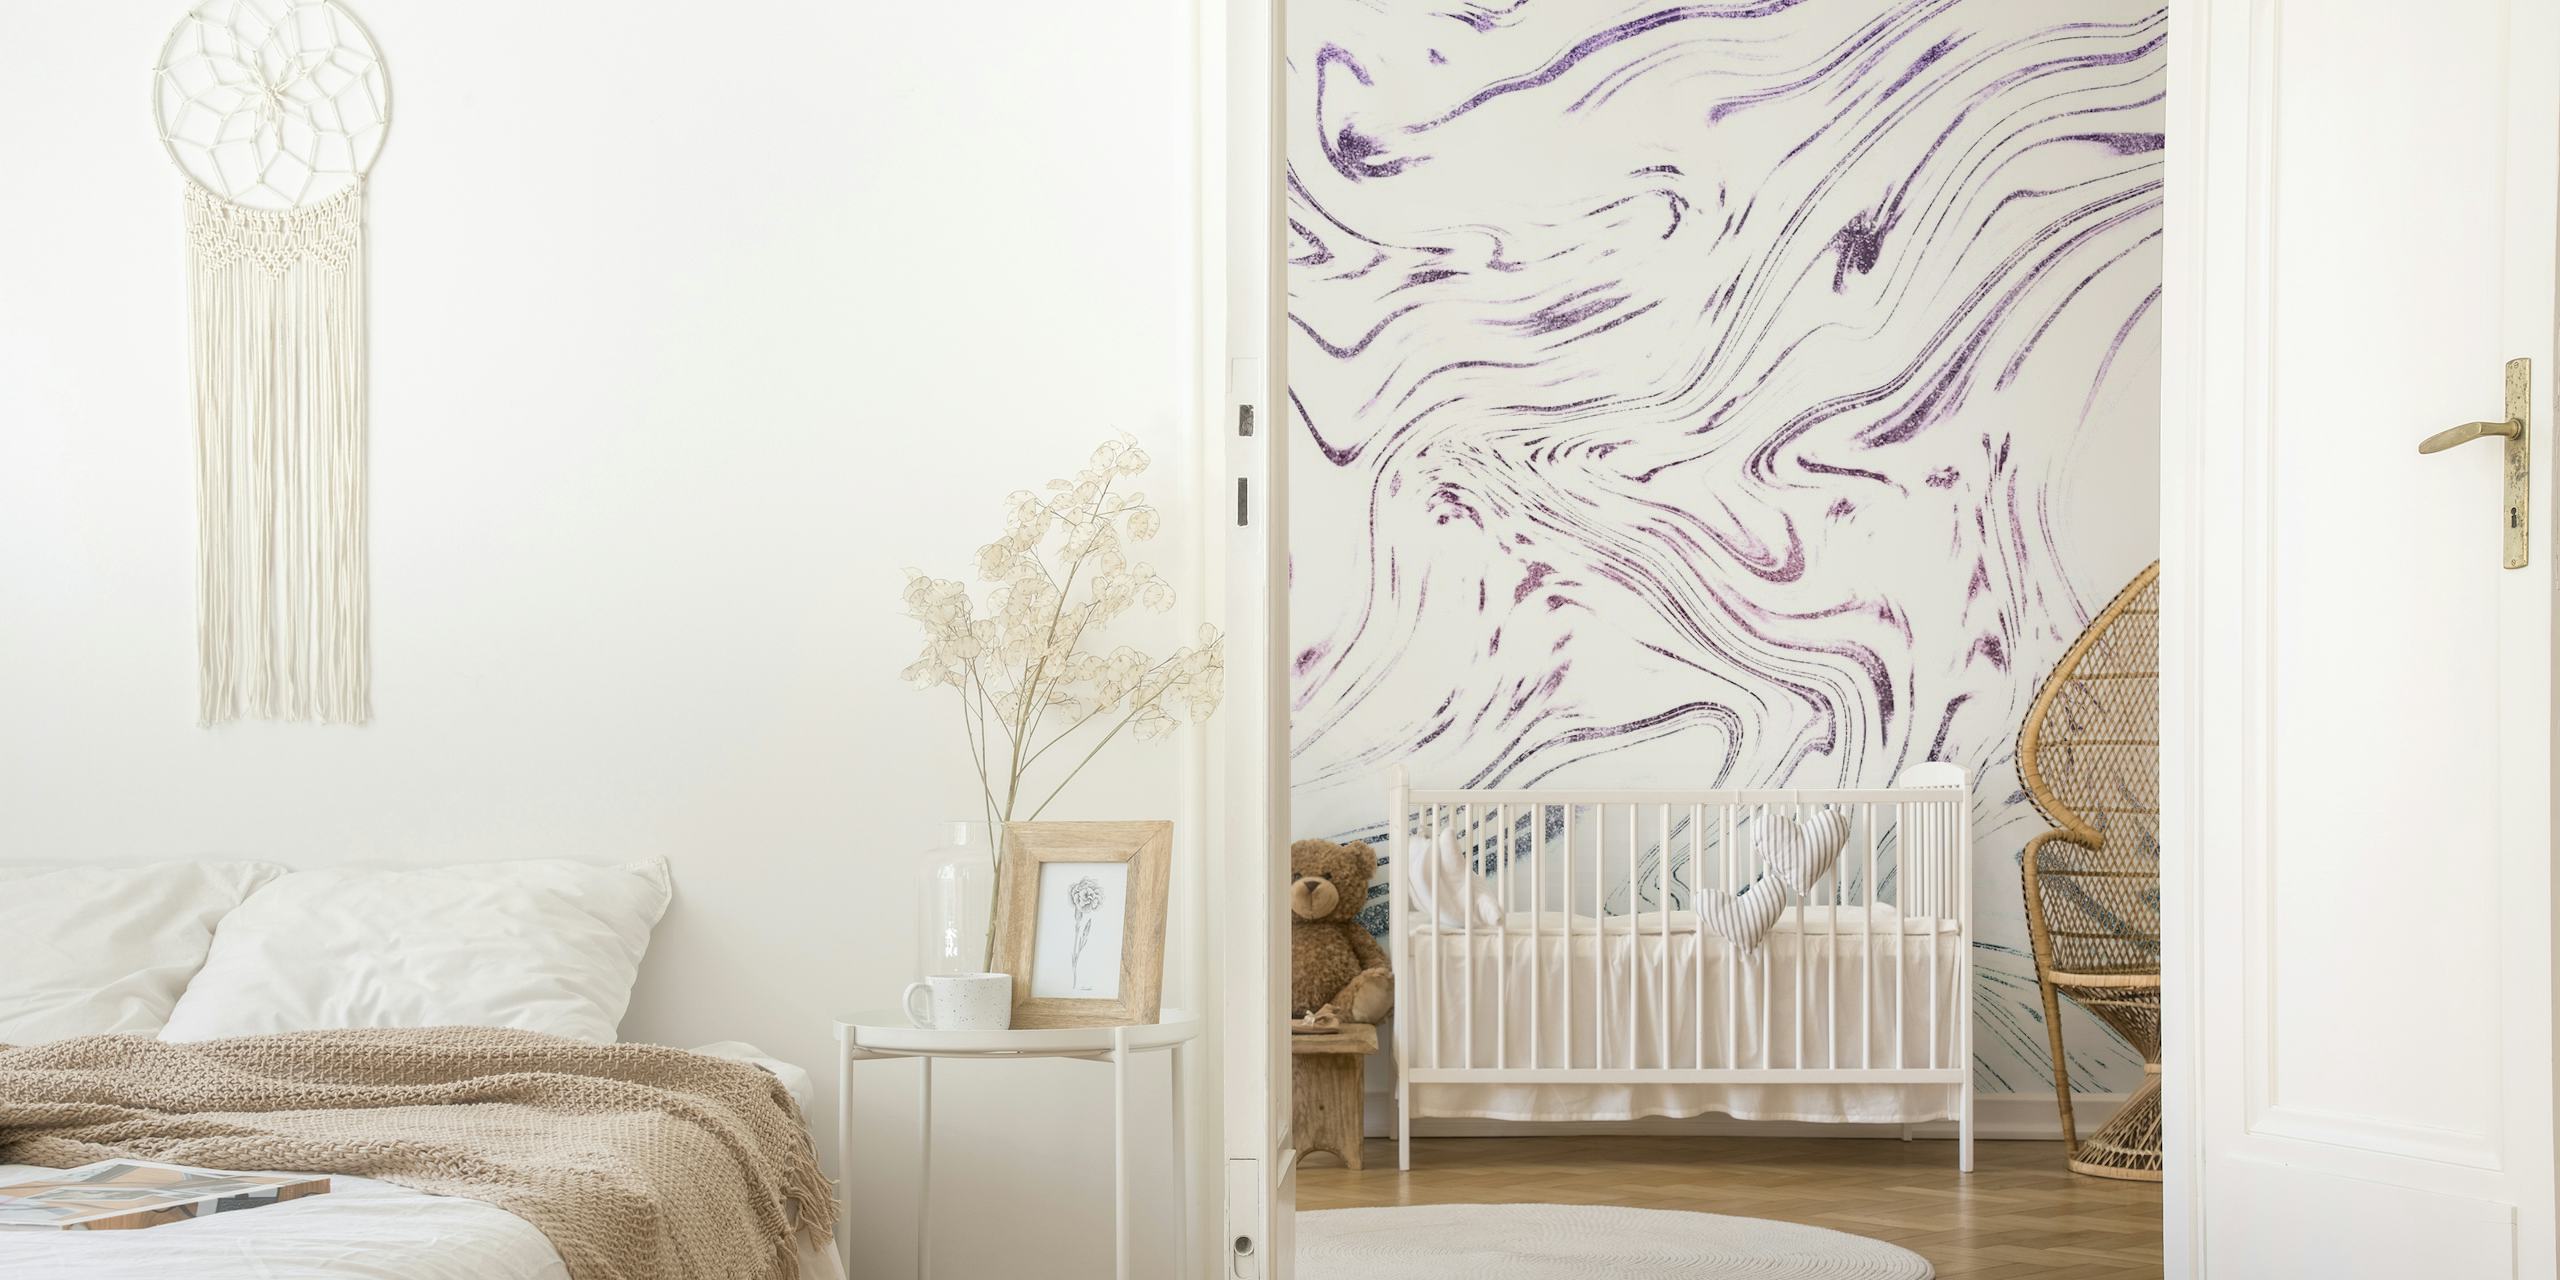 Whimsical unicorn-inspired glitter marble wall mural with swirls of pink, purple, and silver